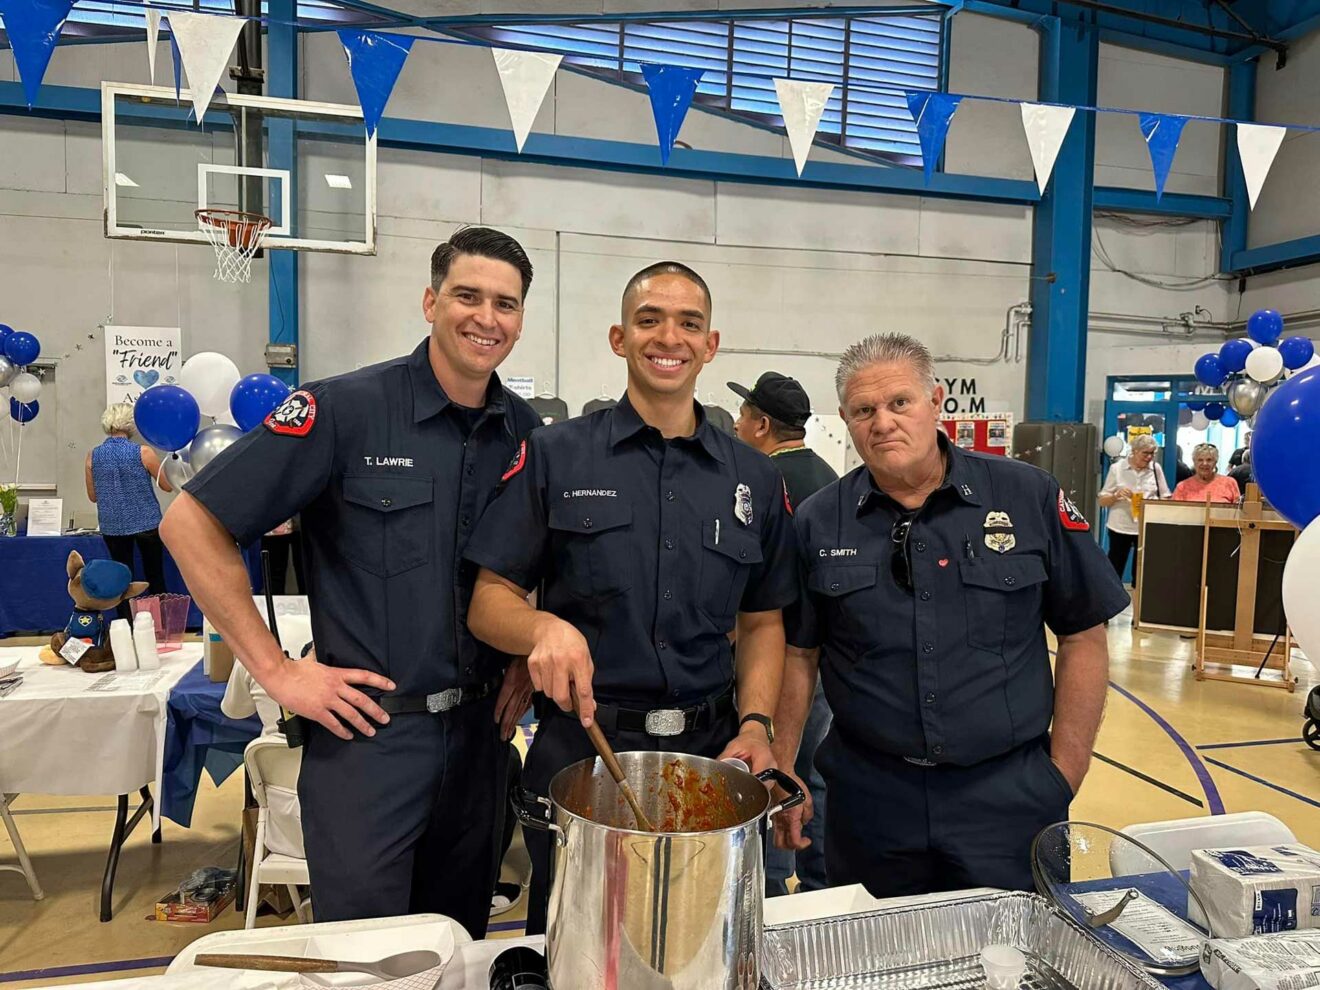 Most of the Fire Department were all smiles